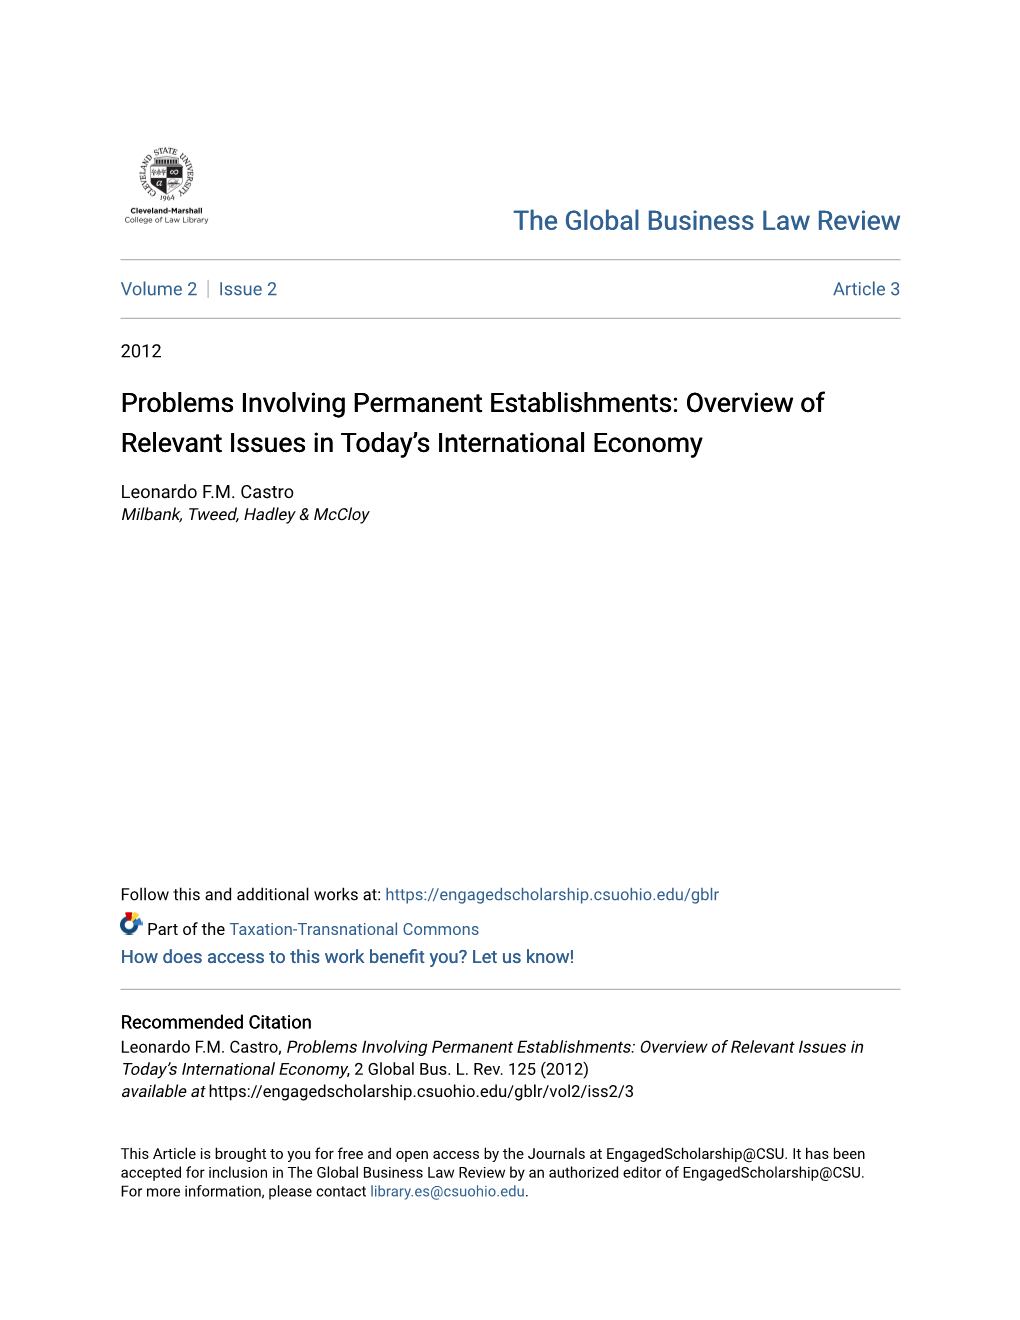 Problems Involving Permanent Establishments: Overview of Relevant Issues in Today’S International Economy